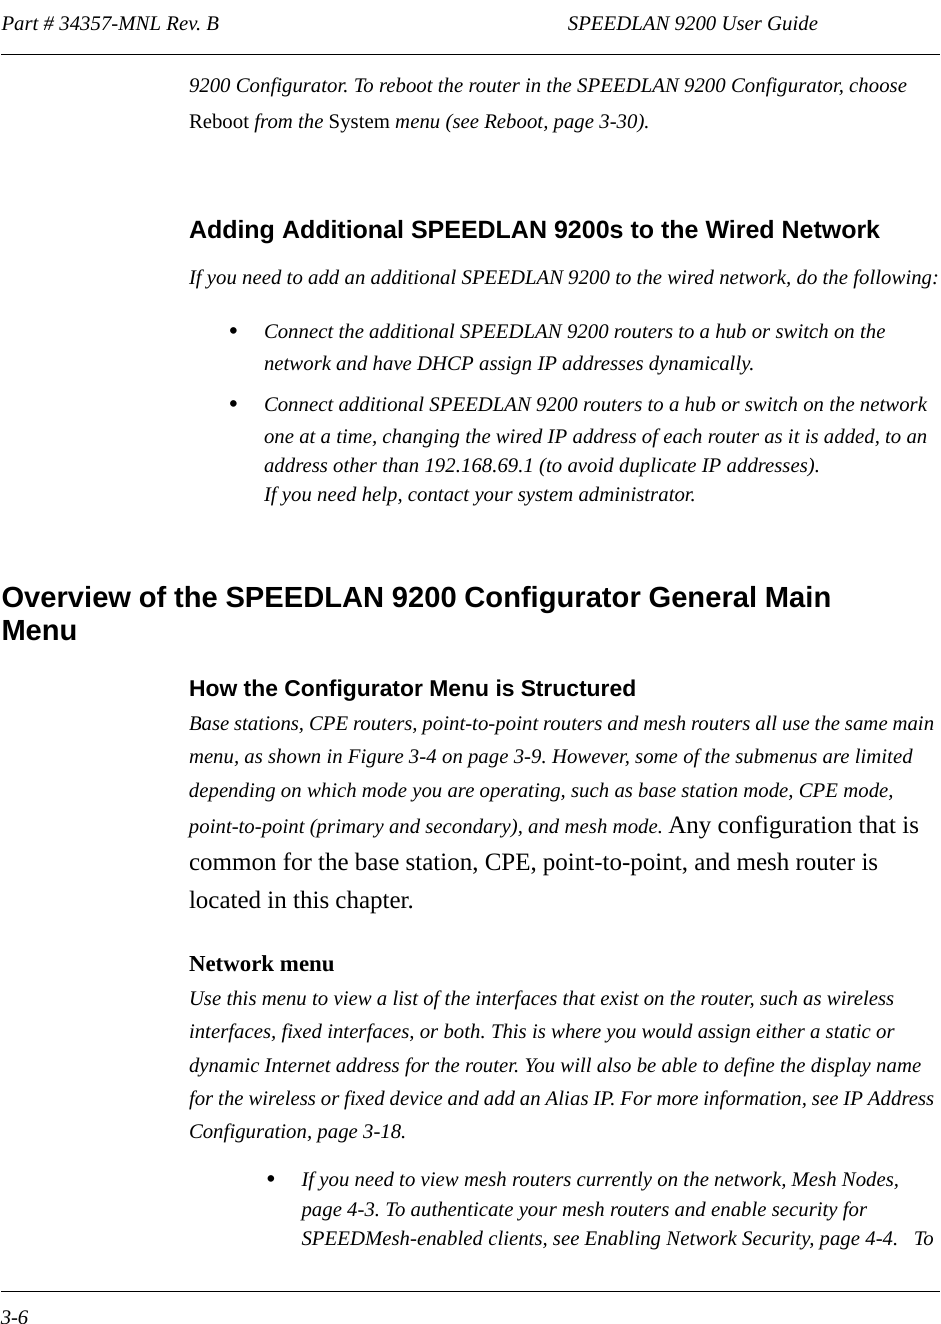 Part # 34357-MNL Rev. B                                                                   SPEEDLAN 9200 User Guide 3-69200 Configurator. To reboot the router in the SPEEDLAN 9200 Configurator, choose Reboot from the System menu (see Reboot, page 3-30).Adding Additional SPEEDLAN 9200s to the Wired NetworkIf you need to add an additional SPEEDLAN 9200 to the wired network, do the following:•Connect the additional SPEEDLAN 9200 routers to a hub or switch on the network and have DHCP assign IP addresses dynamically. •Connect additional SPEEDLAN 9200 routers to a hub or switch on the network one at a time, changing the wired IP address of each router as it is added, to an address other than 192.168.69.1 (to avoid duplicate IP addresses).  If you need help, contact your system administrator.Overview of the SPEEDLAN 9200 Configurator General Main MenuHow the Configurator Menu is StructuredBase stations, CPE routers, point-to-point routers and mesh routers all use the same main menu, as shown in Figure 3-4 on page 3-9. However, some of the submenus are limited depending on which mode you are operating, such as base station mode, CPE mode, point-to-point (primary and secondary), and mesh mode. Any configuration that is common for the base station, CPE, point-to-point, and mesh router is located in this chapter. Network menuUse this menu to view a list of the interfaces that exist on the router, such as wireless interfaces, fixed interfaces, or both. This is where you would assign either a static or dynamic Internet address for the router. You will also be able to define the display name for the wireless or fixed device and add an Alias IP. For more information, see IP Address Configuration, page 3-18. •If you need to view mesh routers currently on the network, Mesh Nodes, page 4-3. To authenticate your mesh routers and enable security for SPEEDMesh-enabled clients, see Enabling Network Security, page 4-4.   To 